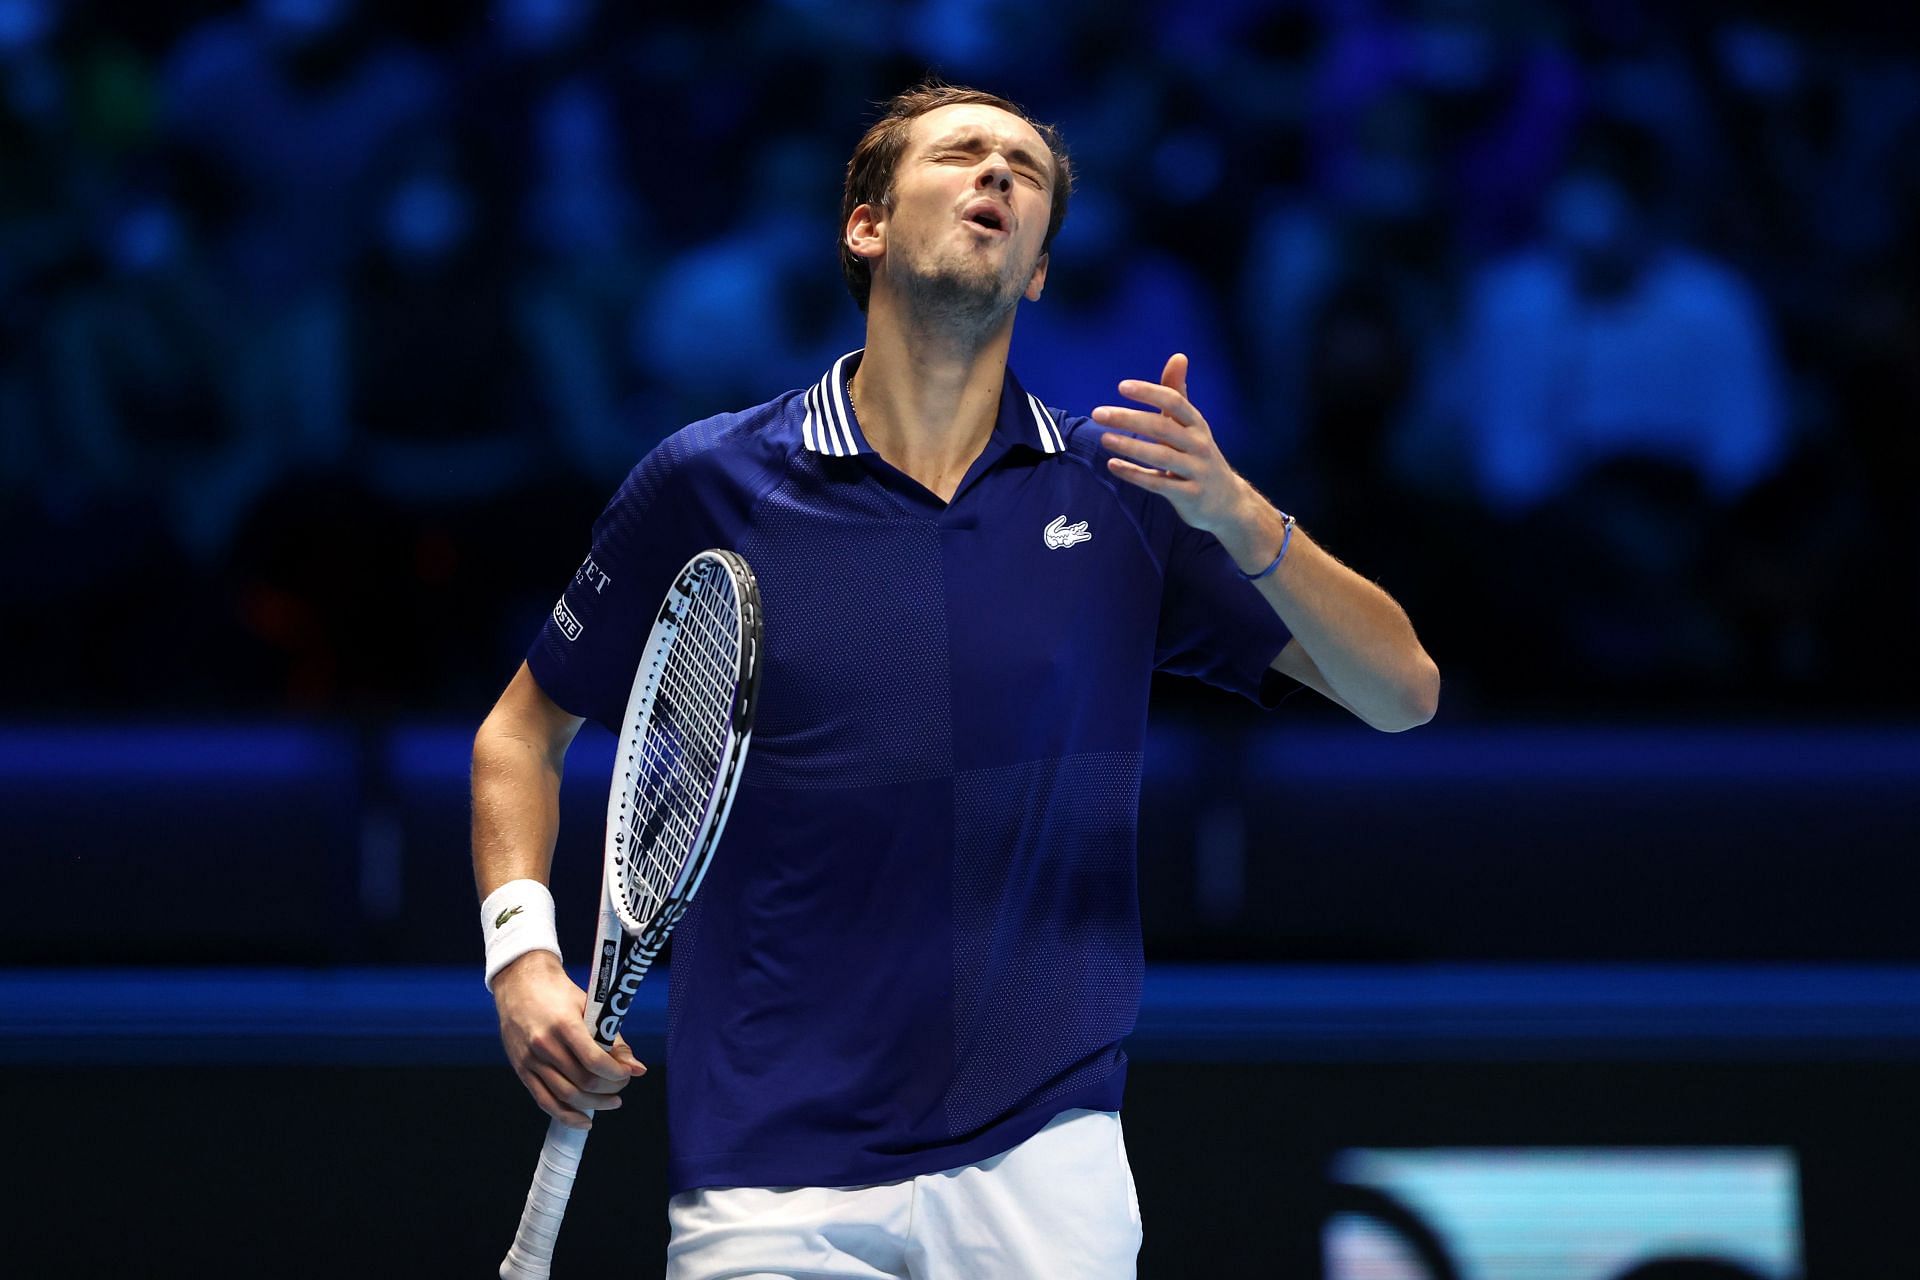 Daniil Medvedev lost to compatriot Andrey Rublev in his opening match of the 2022 ATP Finals.